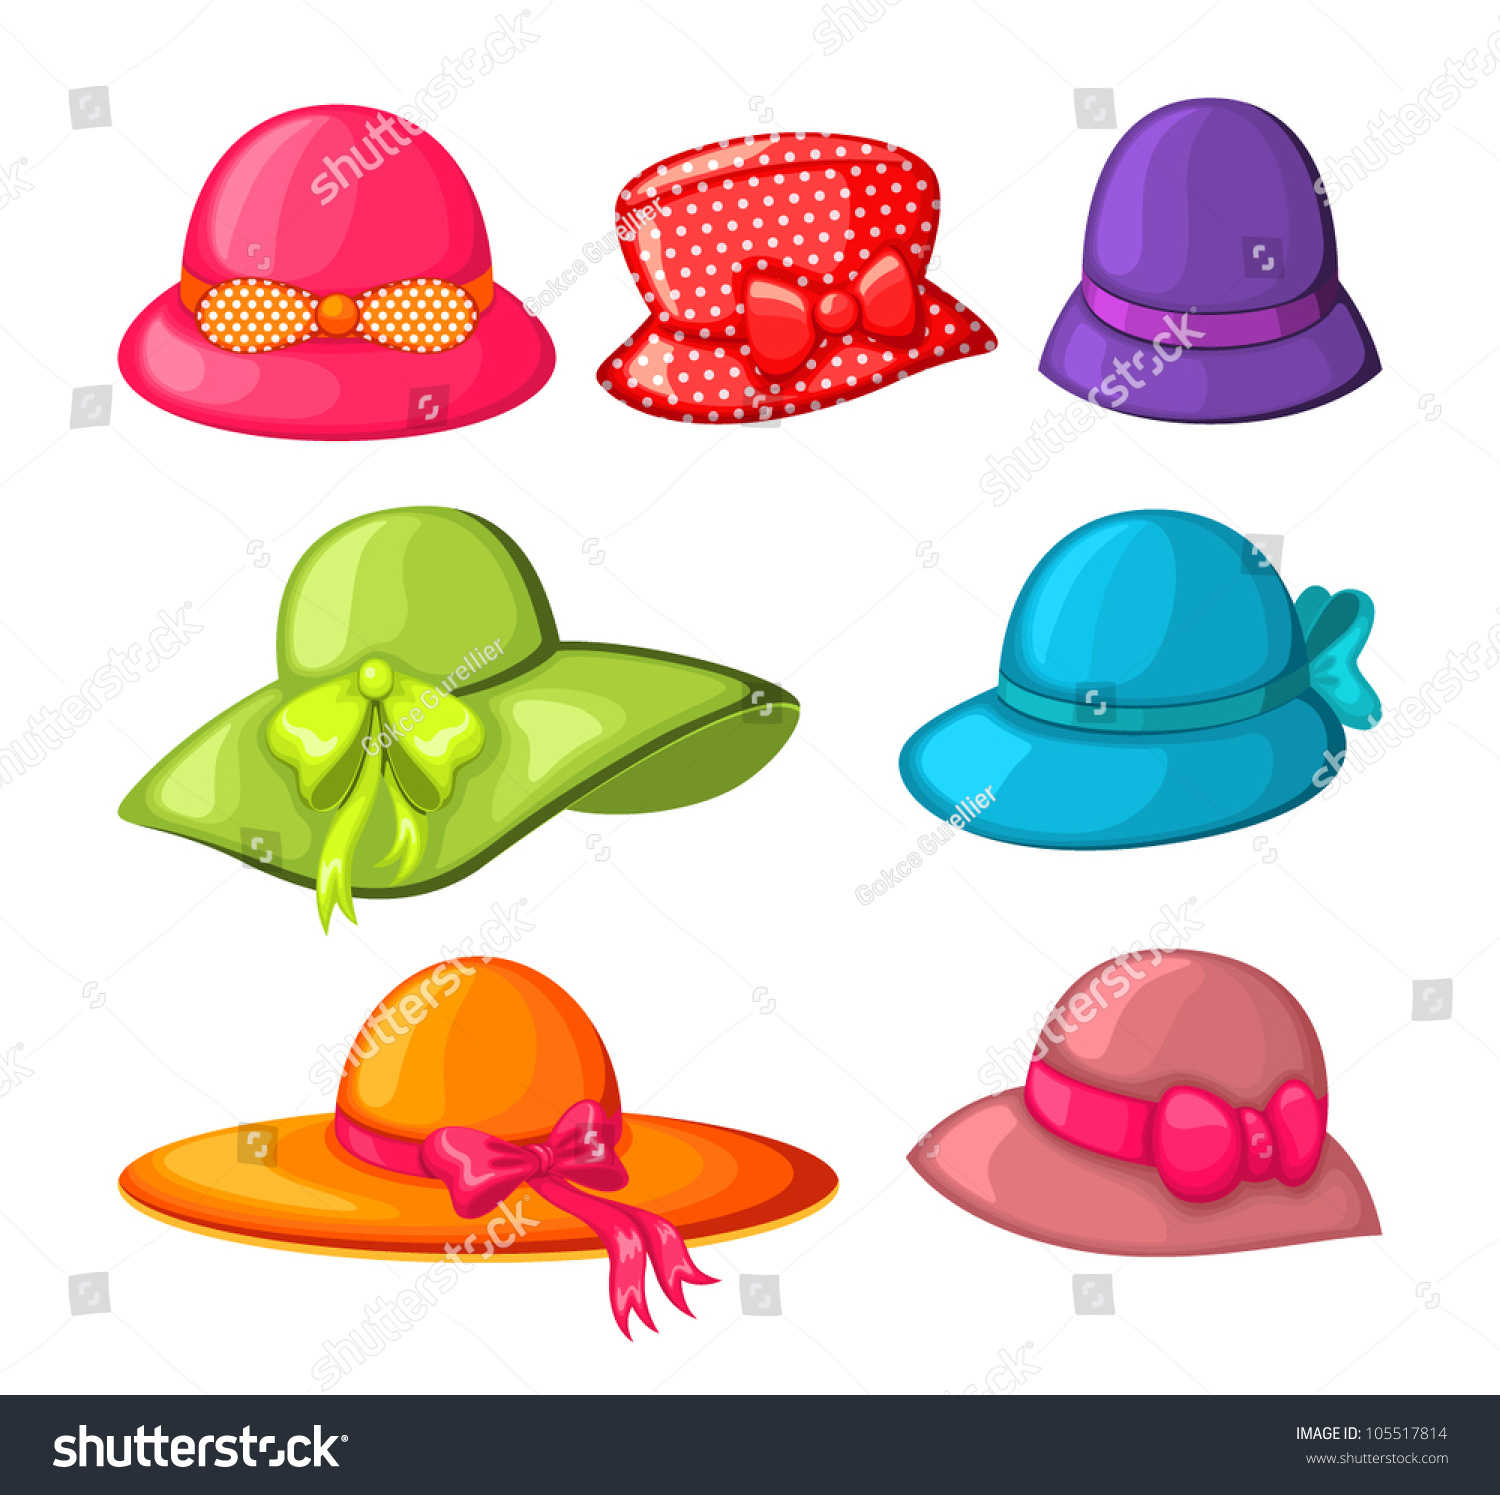 womens hat clipart - photo #37